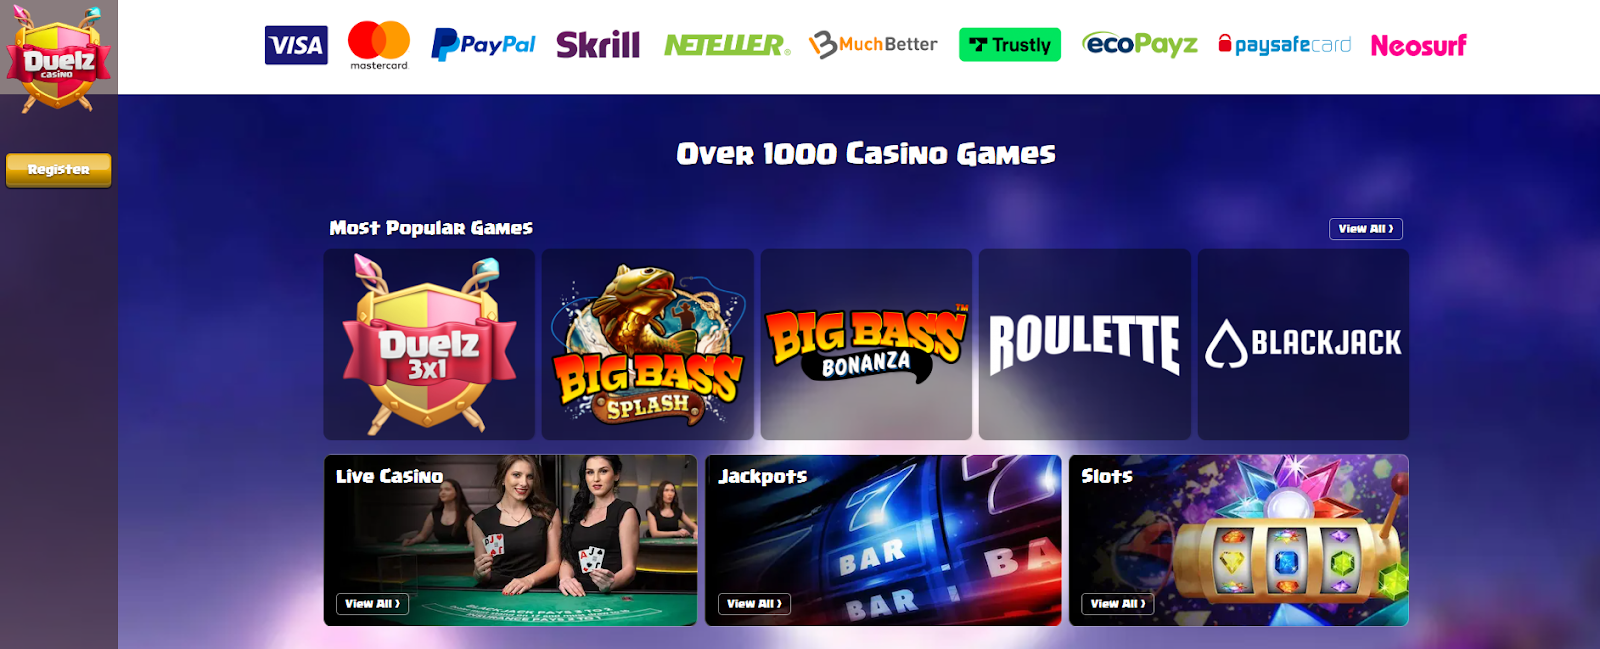 Duelz Casino is one of the best safe online casinos for UK players